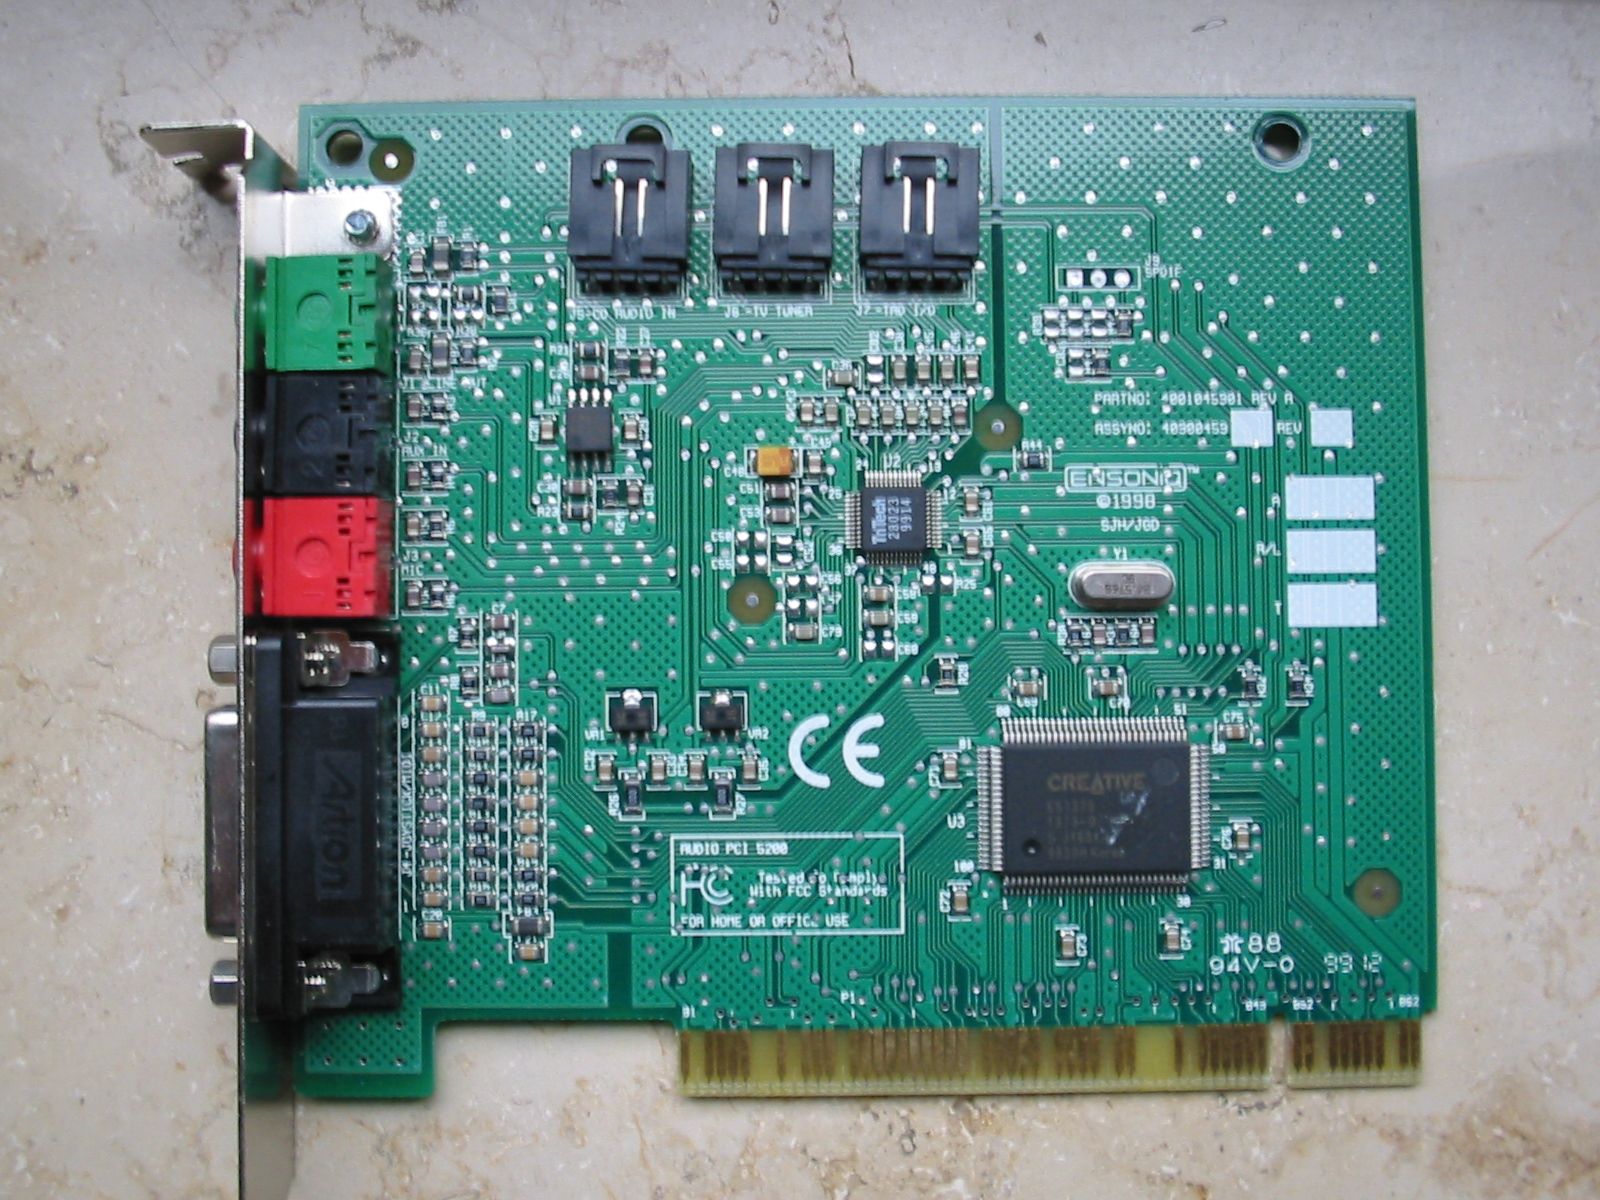 This is not my image, but this is same PCB